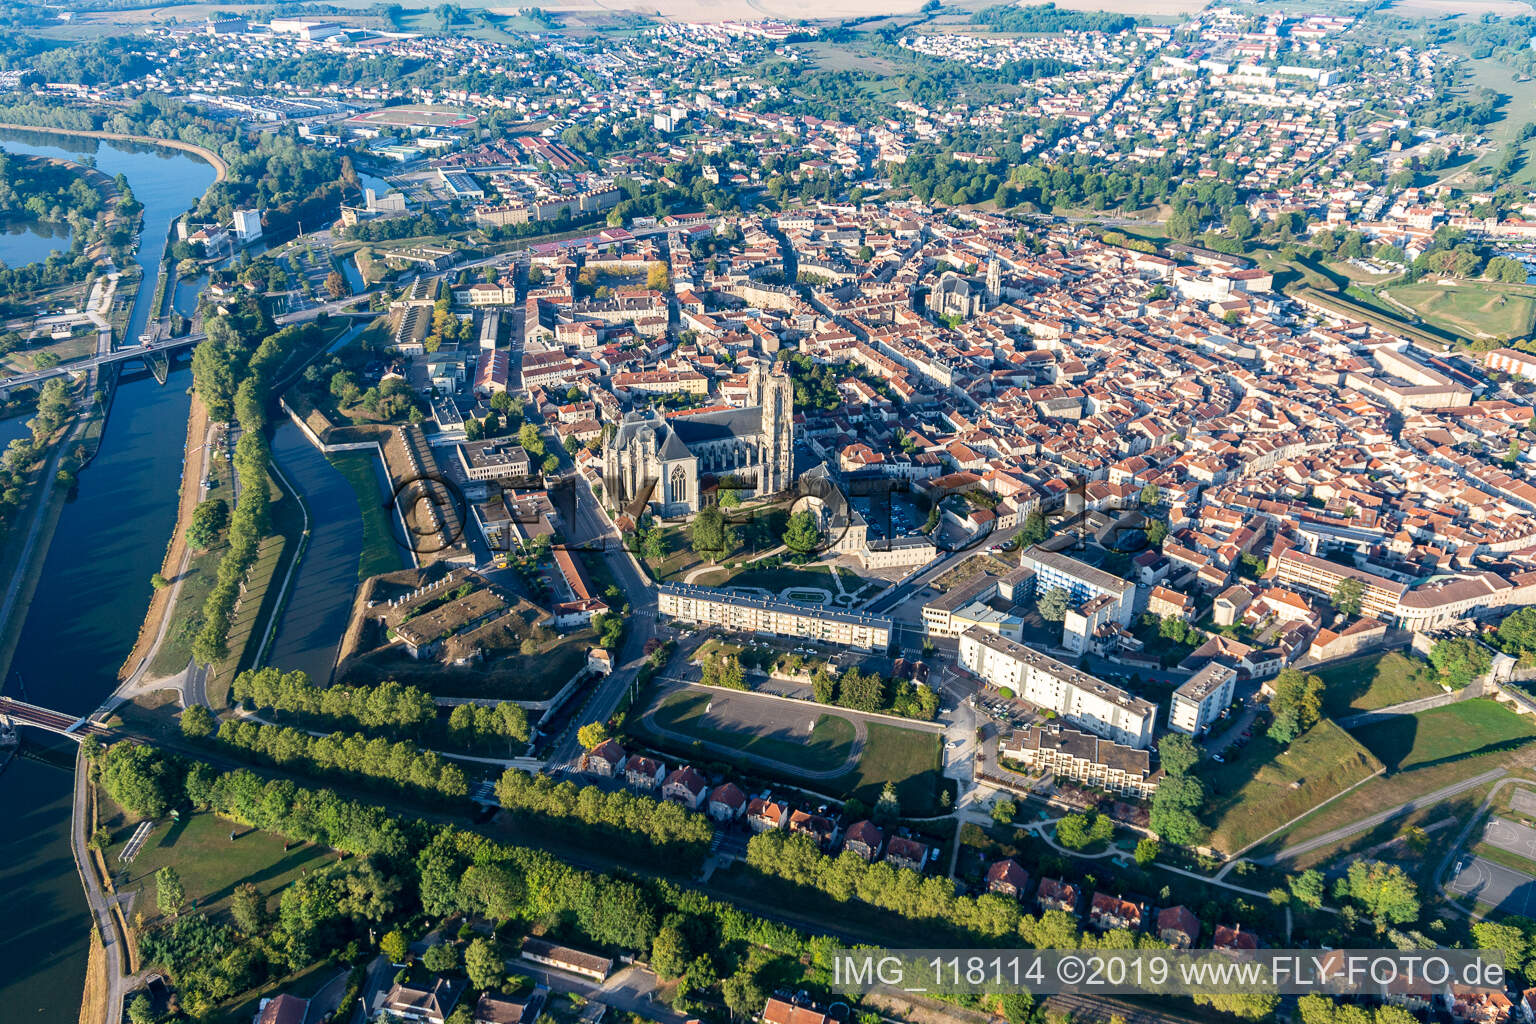 Toul in the state Meurthe et Moselle, France out of the air